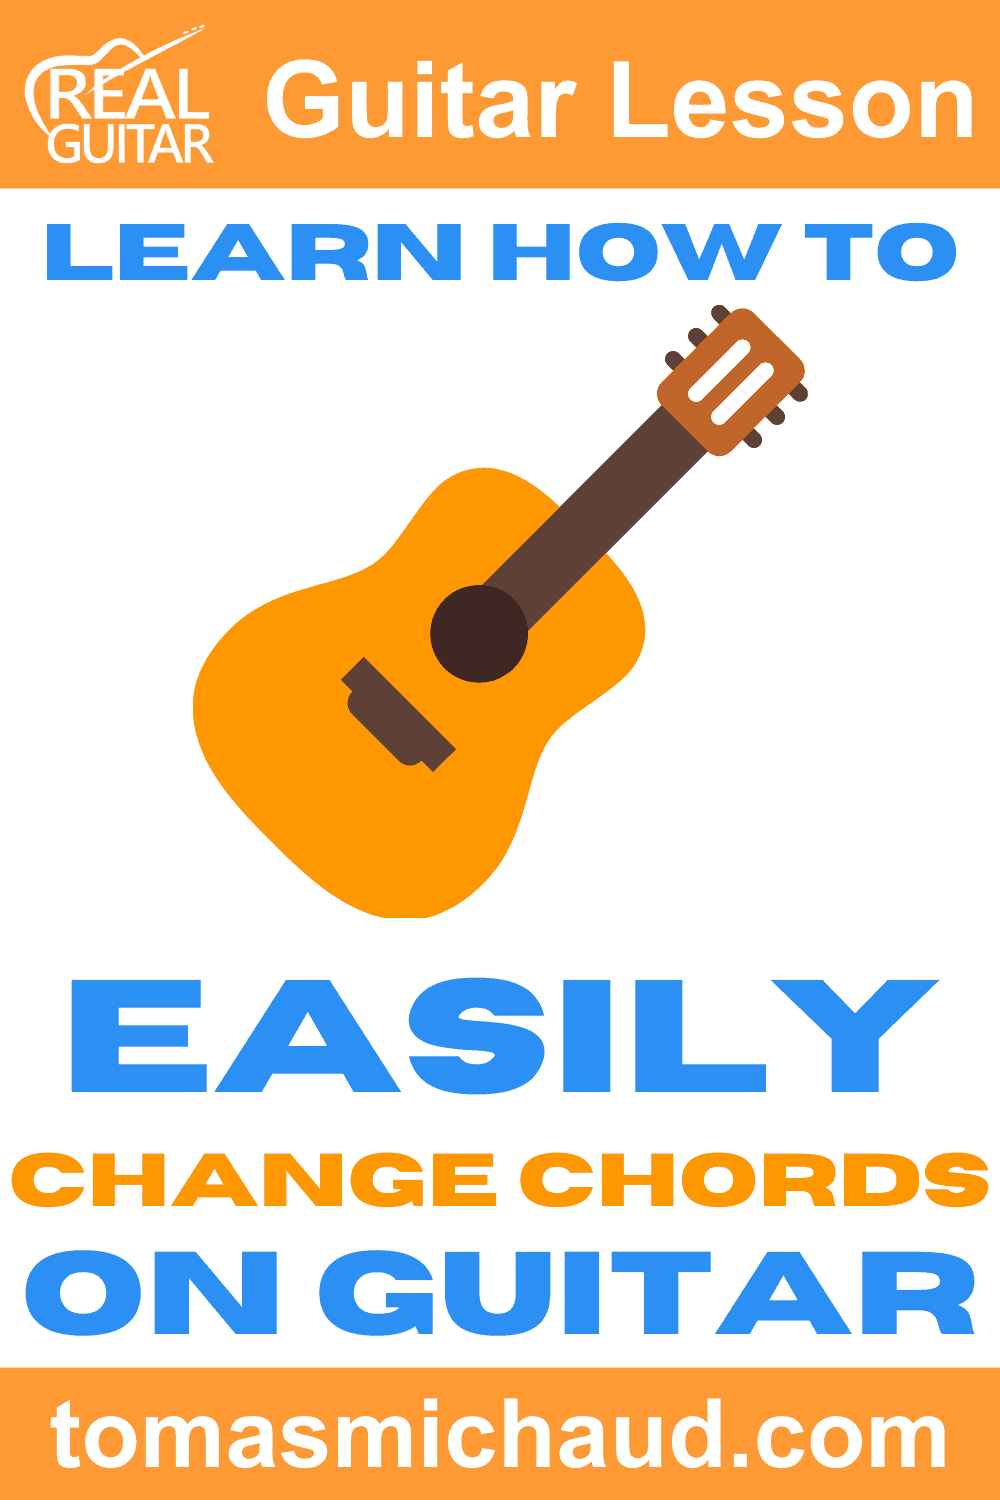 Learn How To Easily Change Chords On Guitar